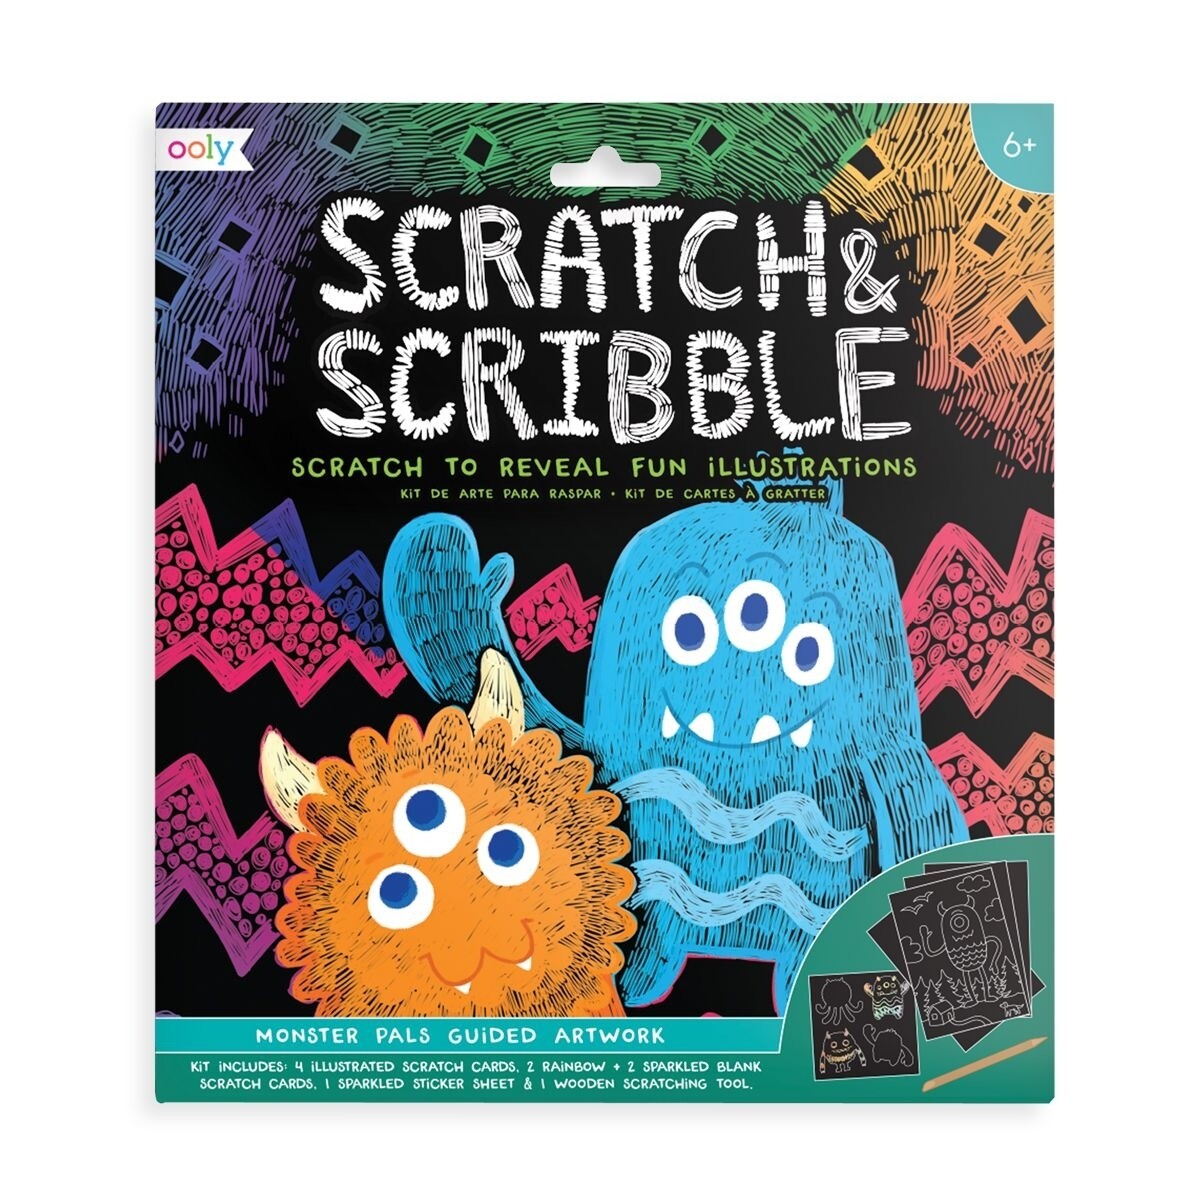 Ooly Scratch & Scribble Art Kit - Monster Pals